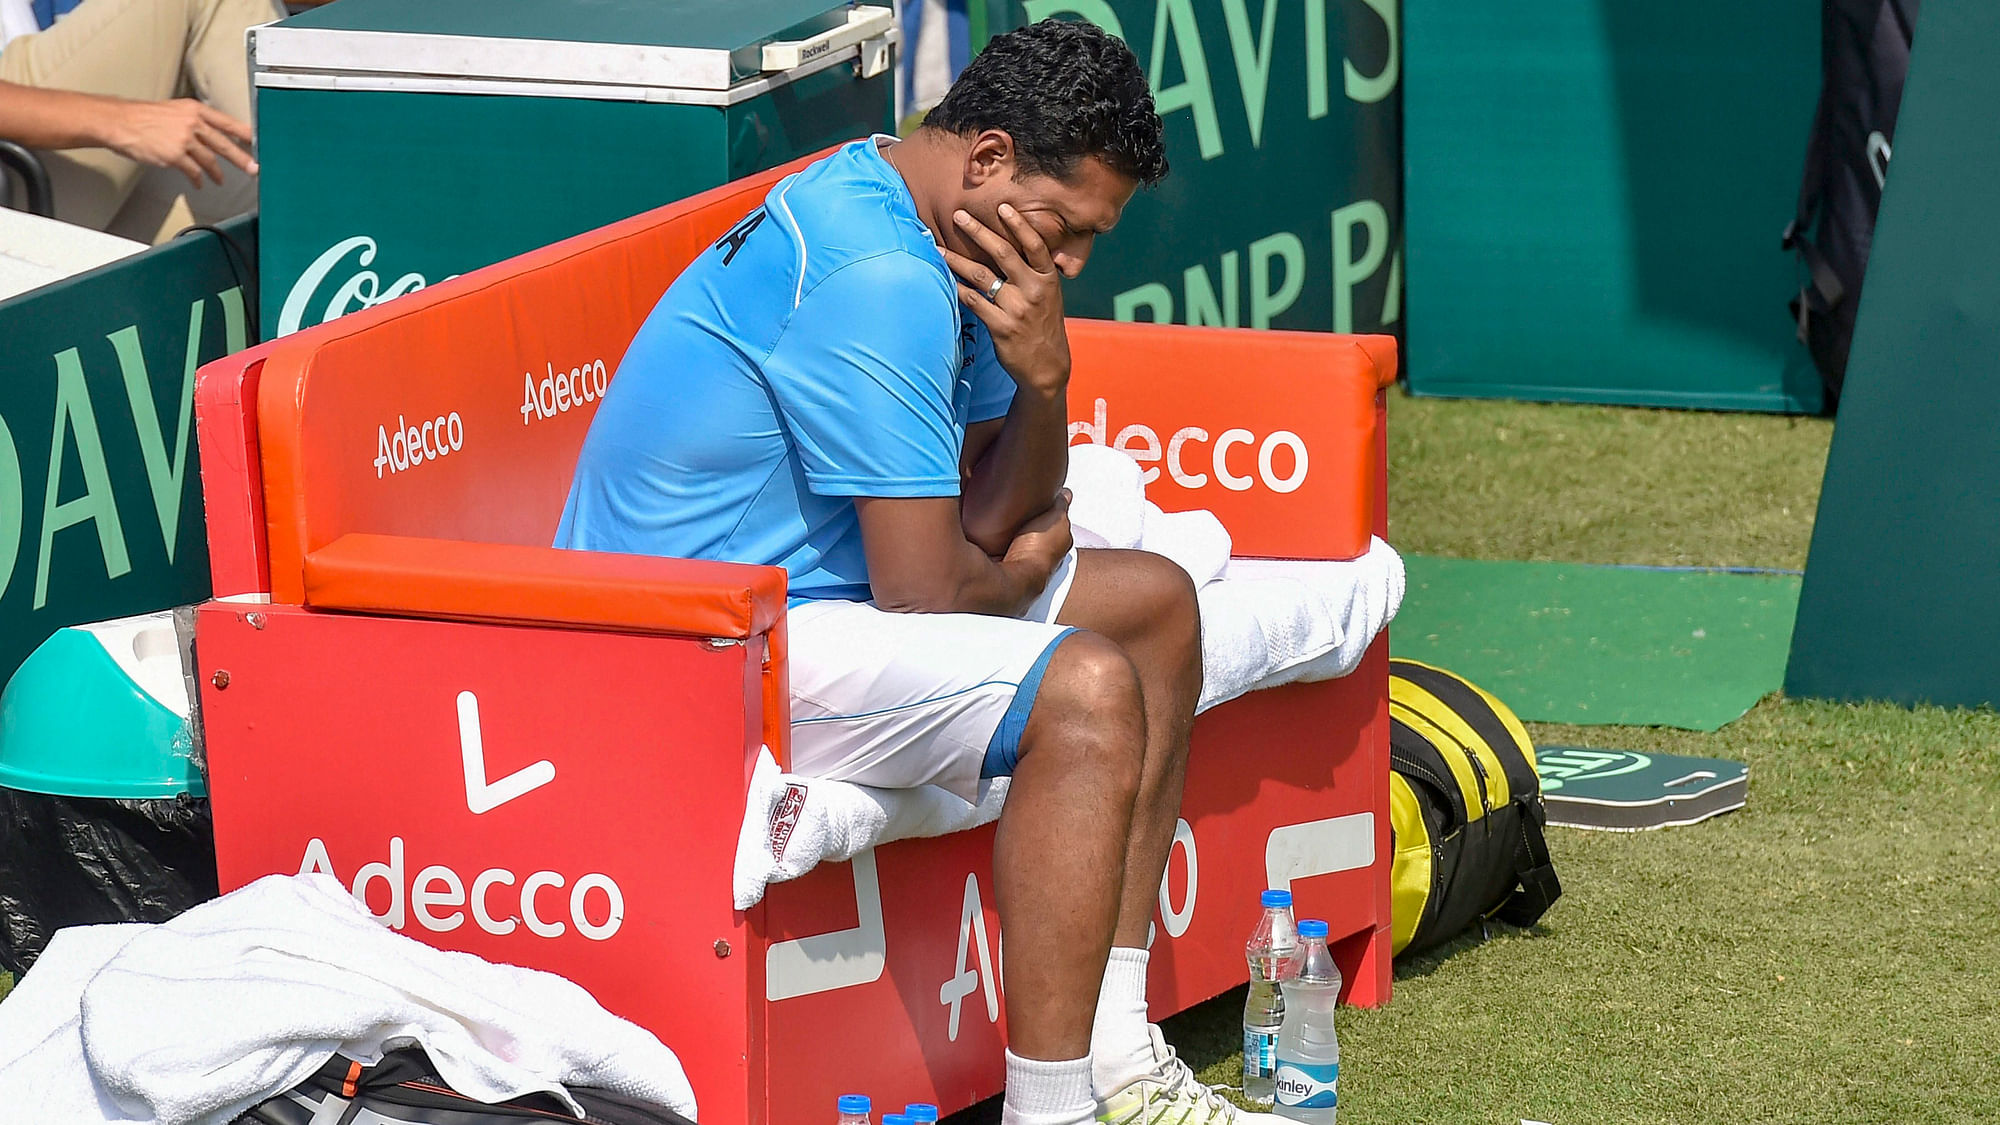 India’s Davis Cup non-playing captain Mahesh Bhupathi during the tie against Italy that India lost 3-1.